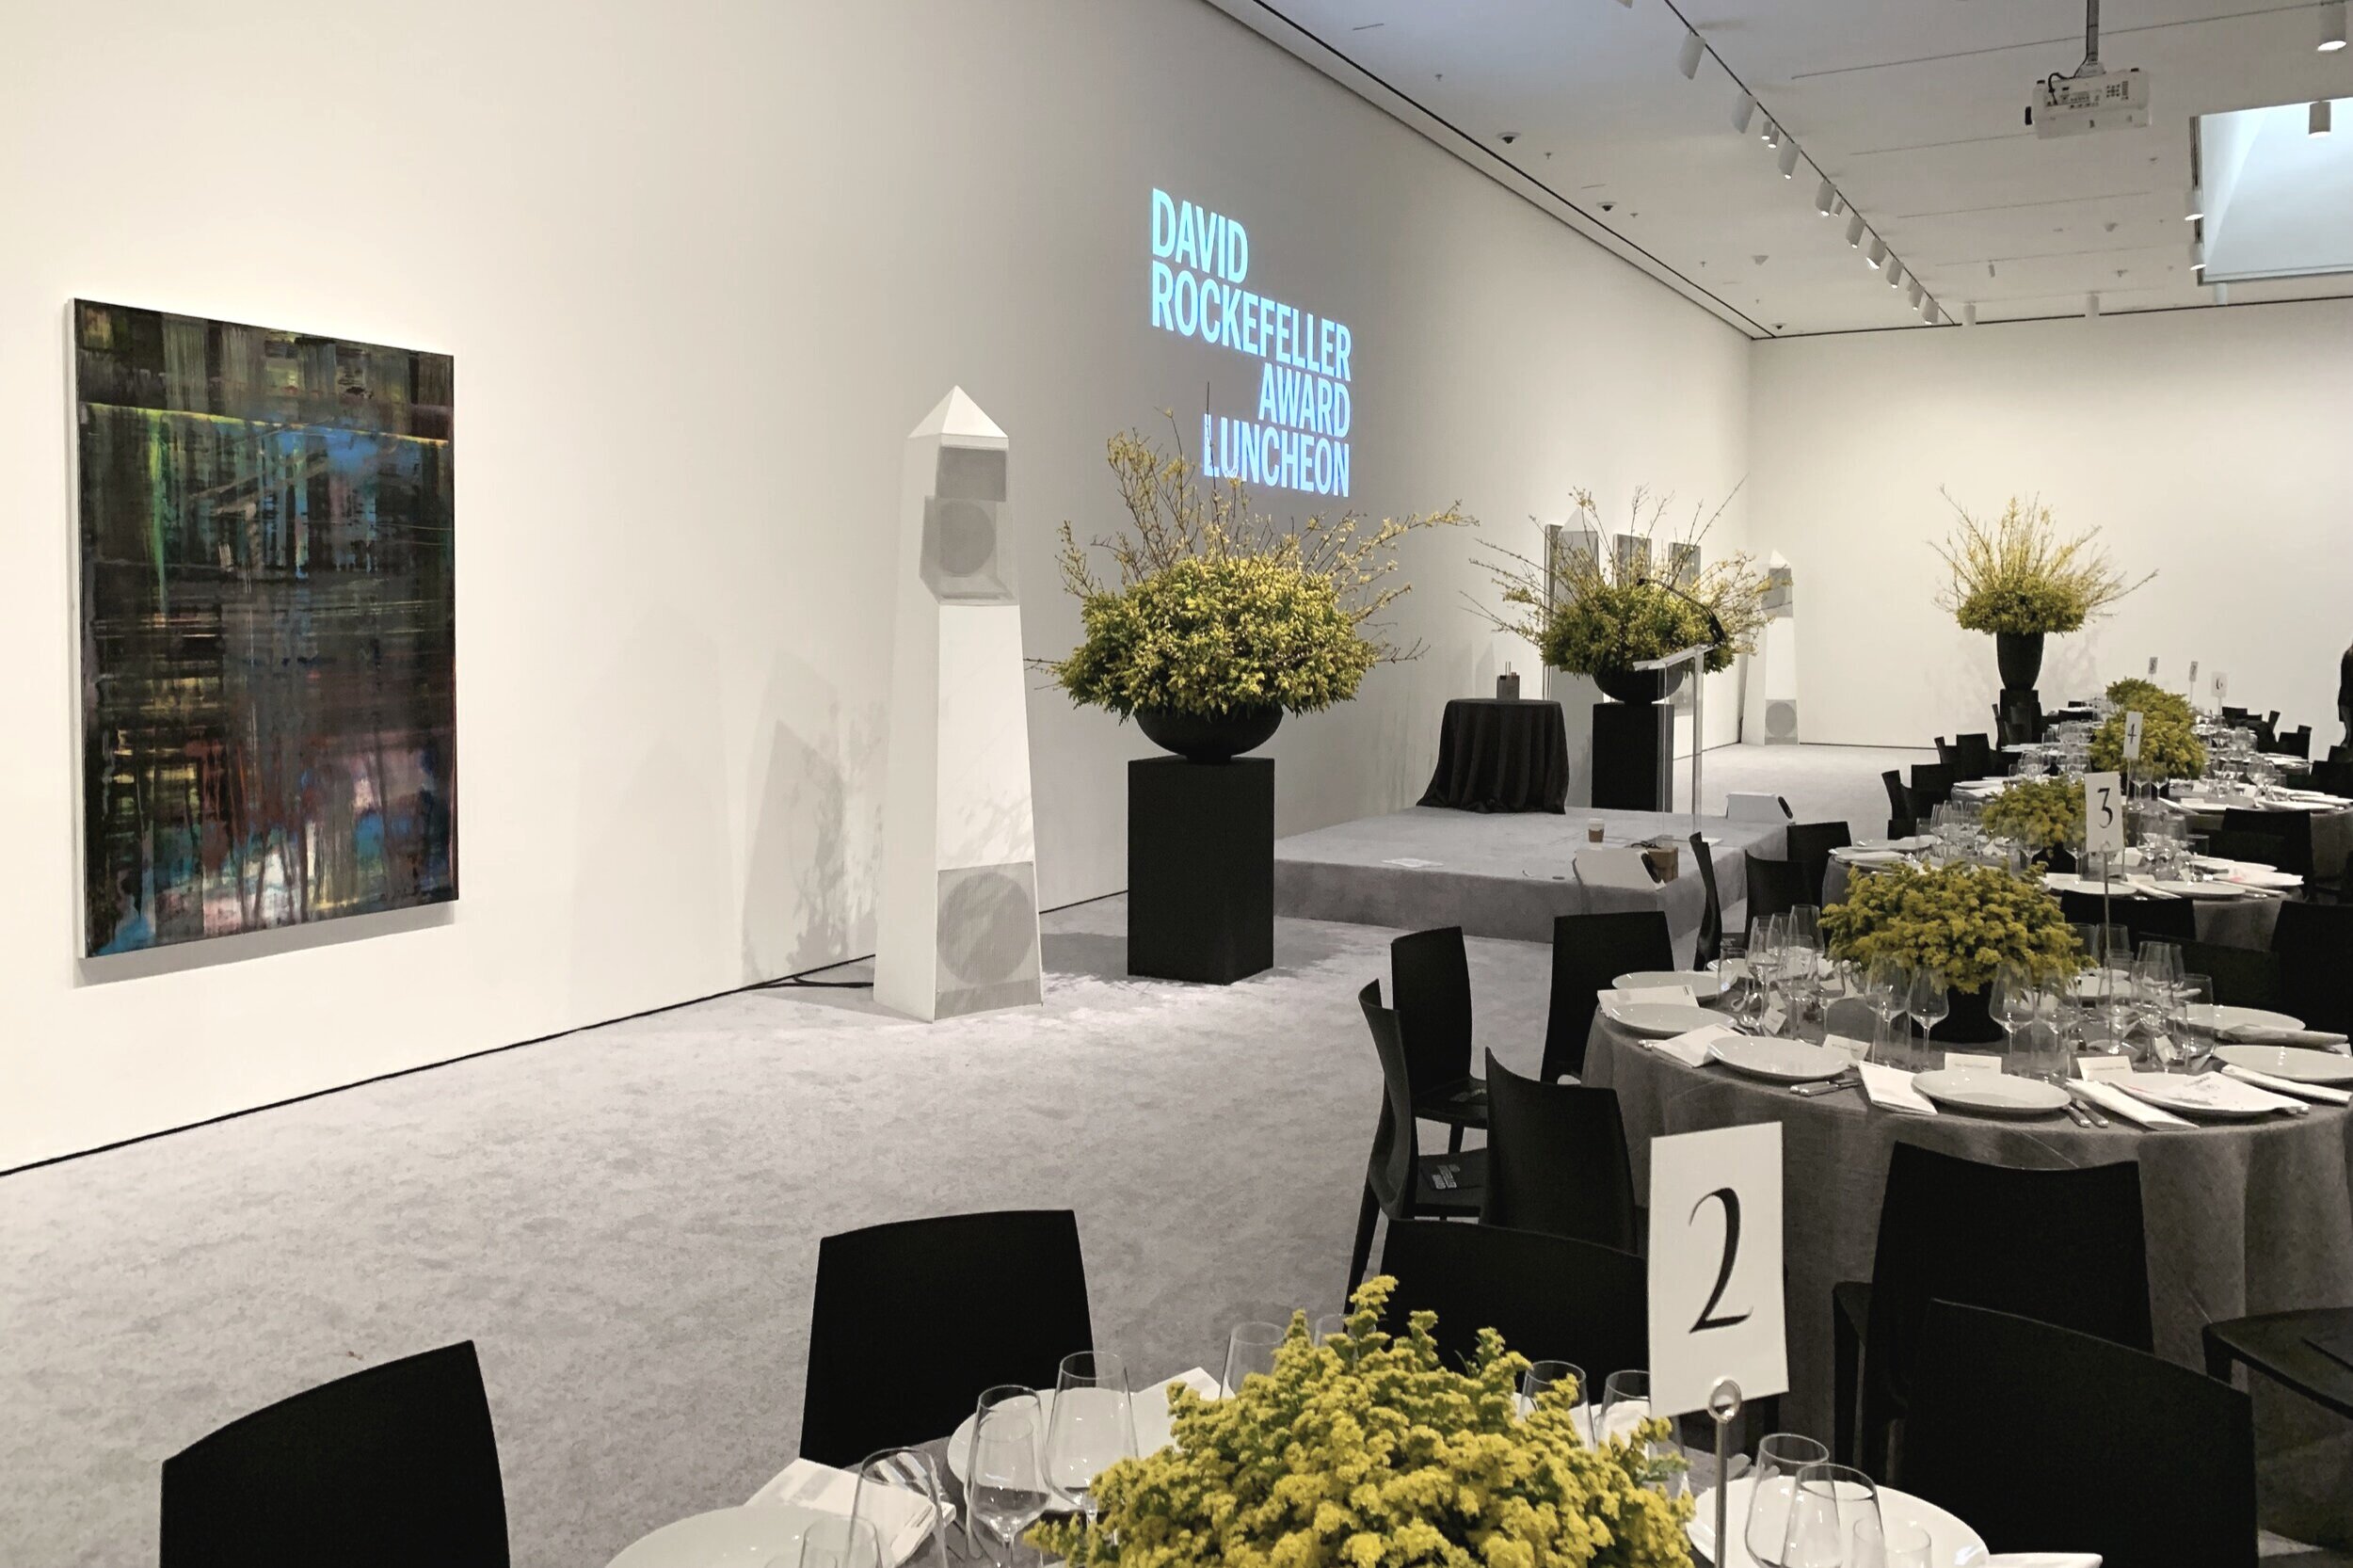  Towers and Coaxes at the David Rockefeller Award Luncheon at the Museum of Modern Art 2019 